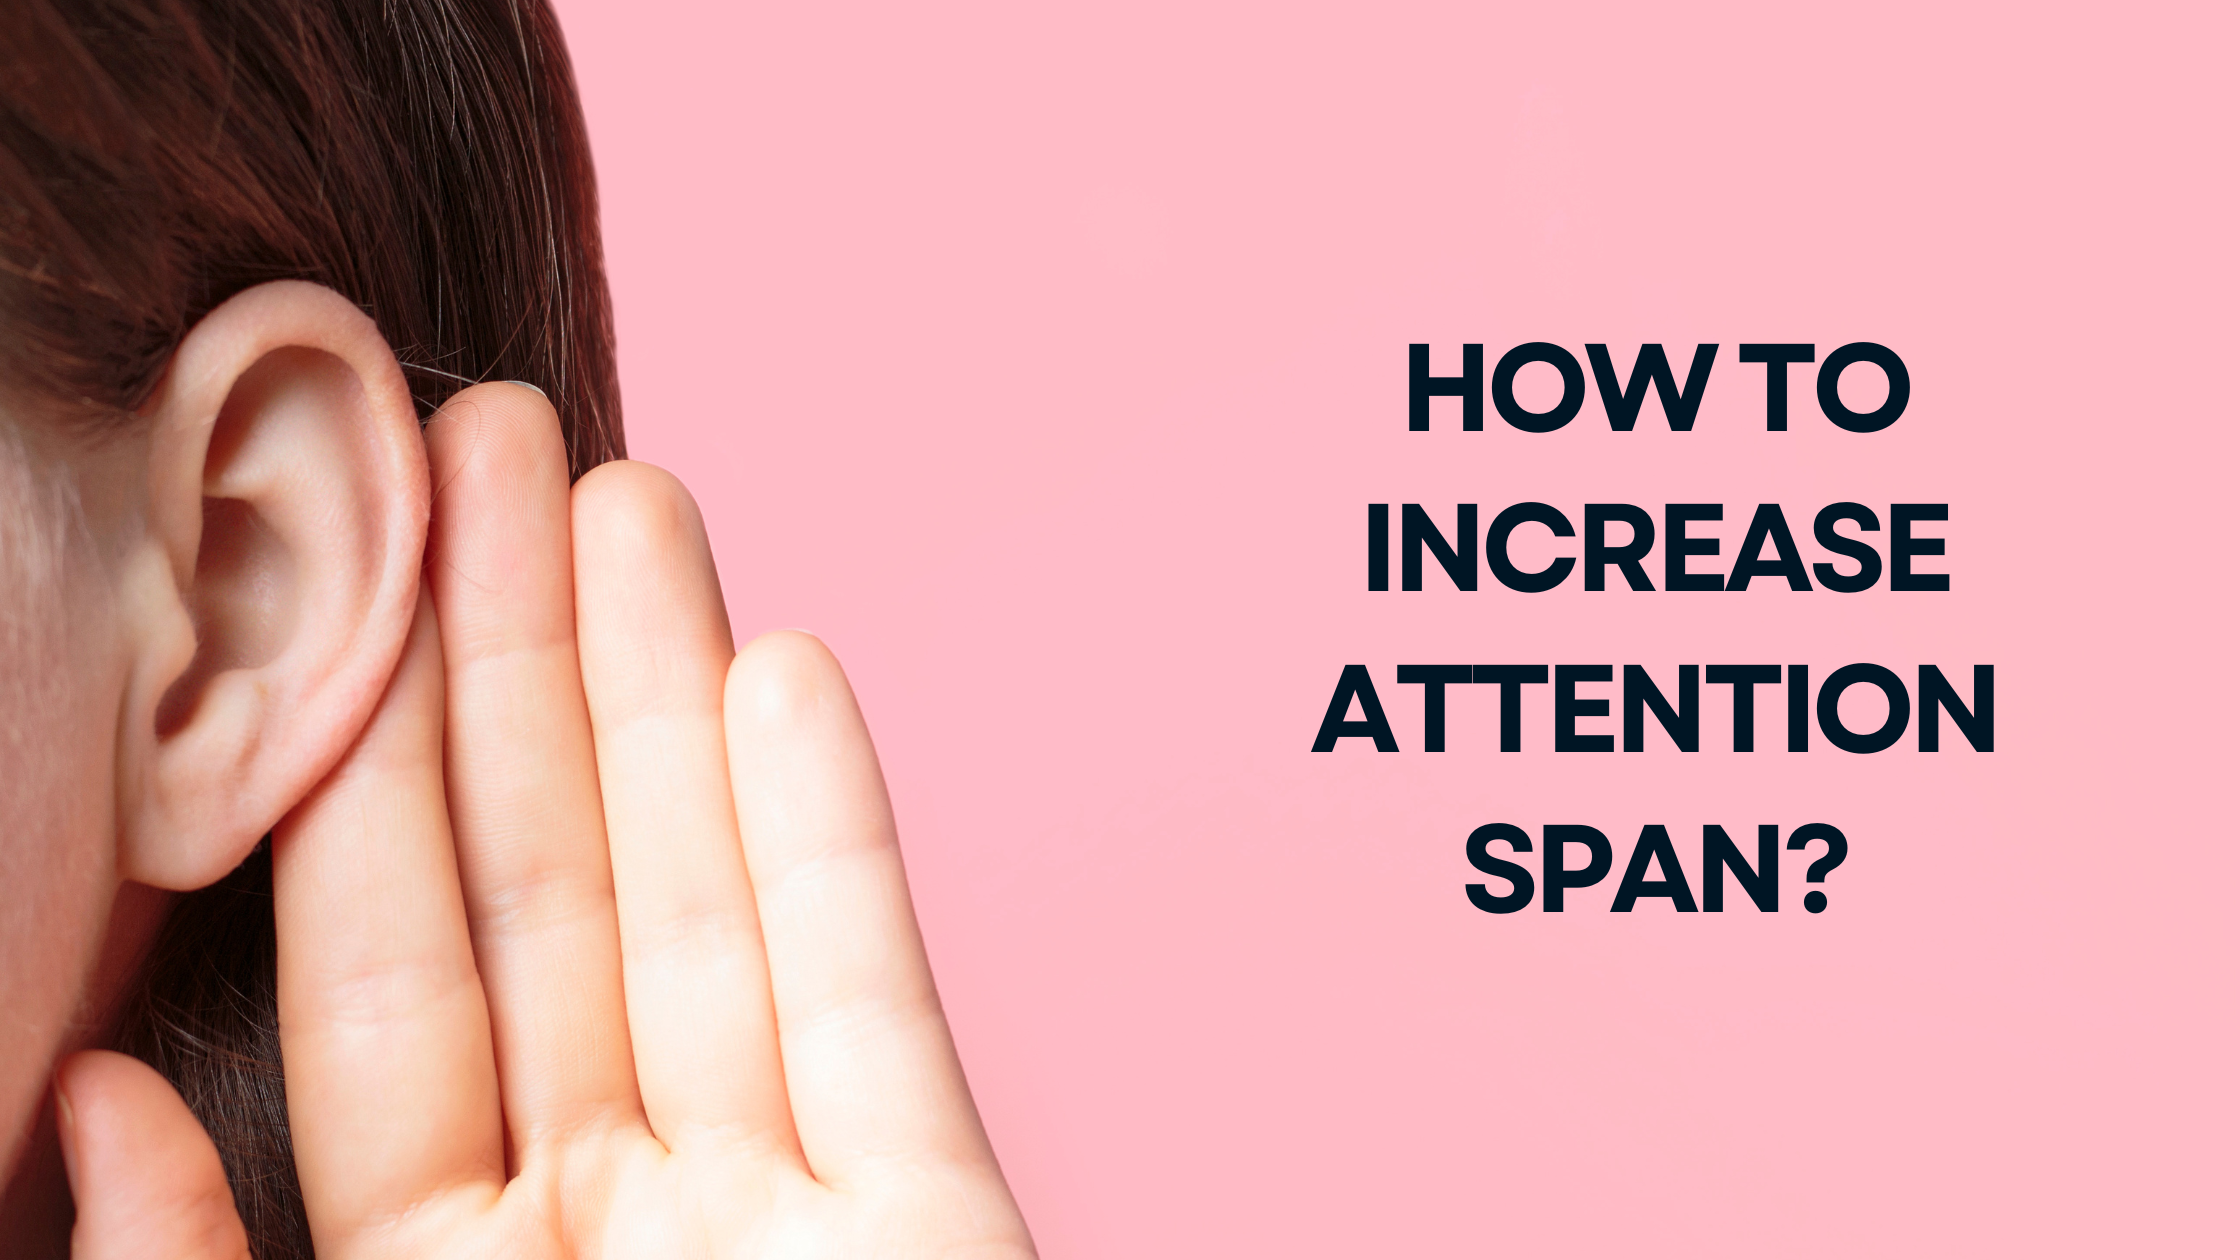 How to Increase Attention Span